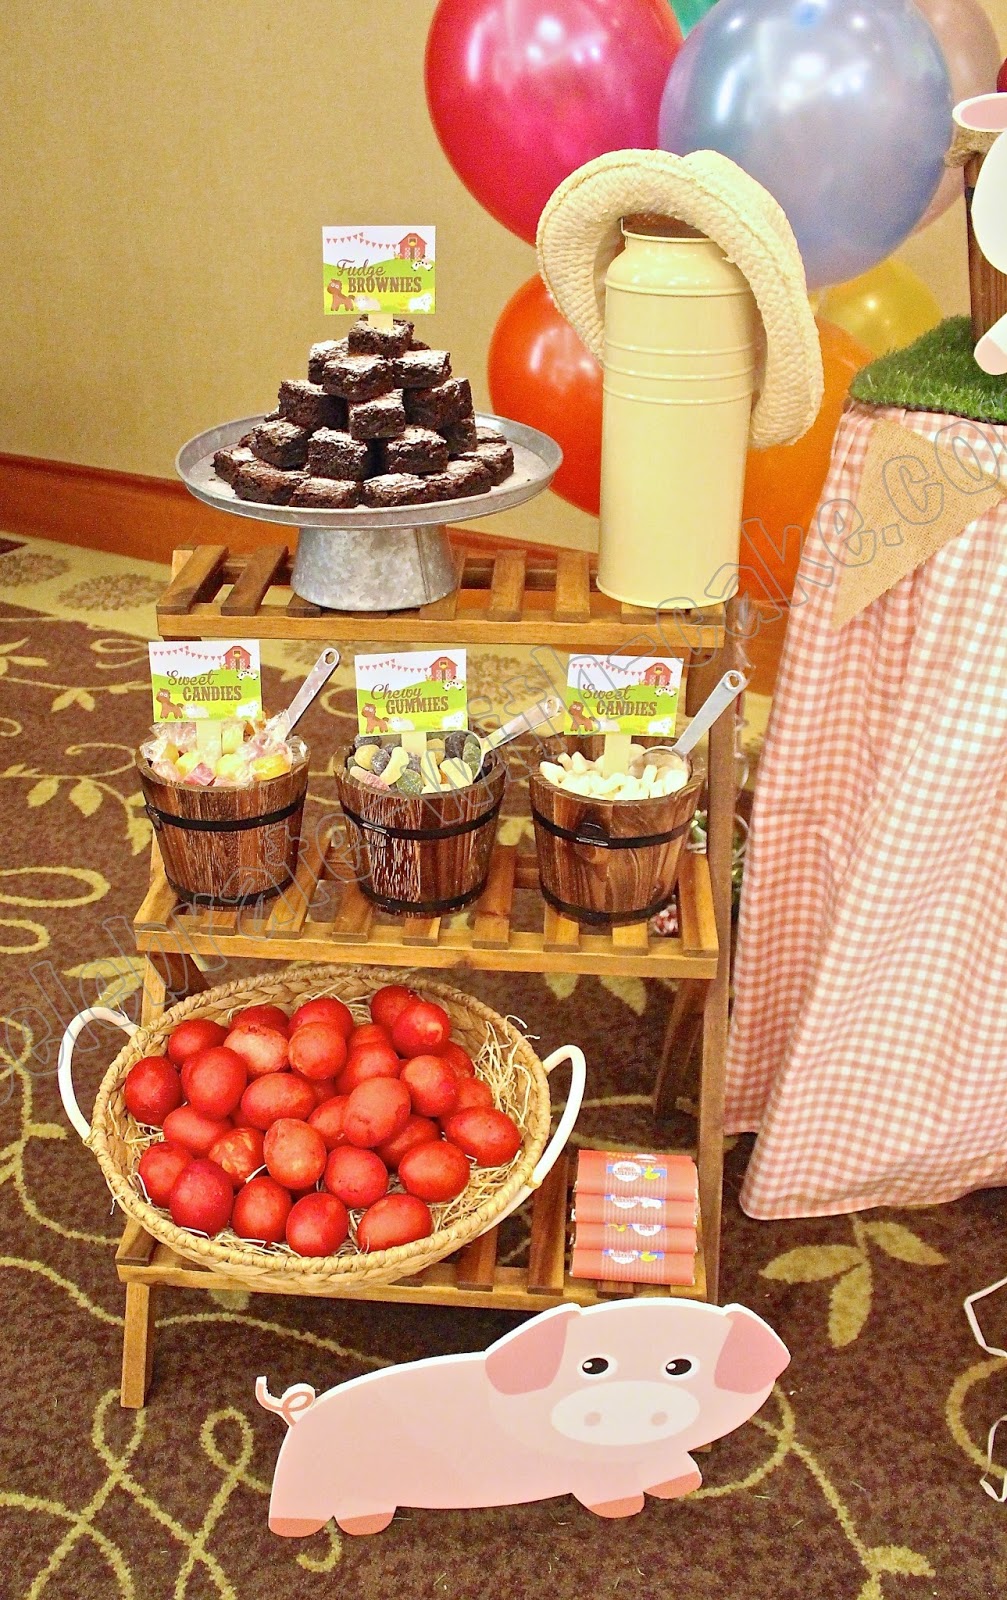 Celebrate with Cake!: Farm Themed Dessert Table (click post to view